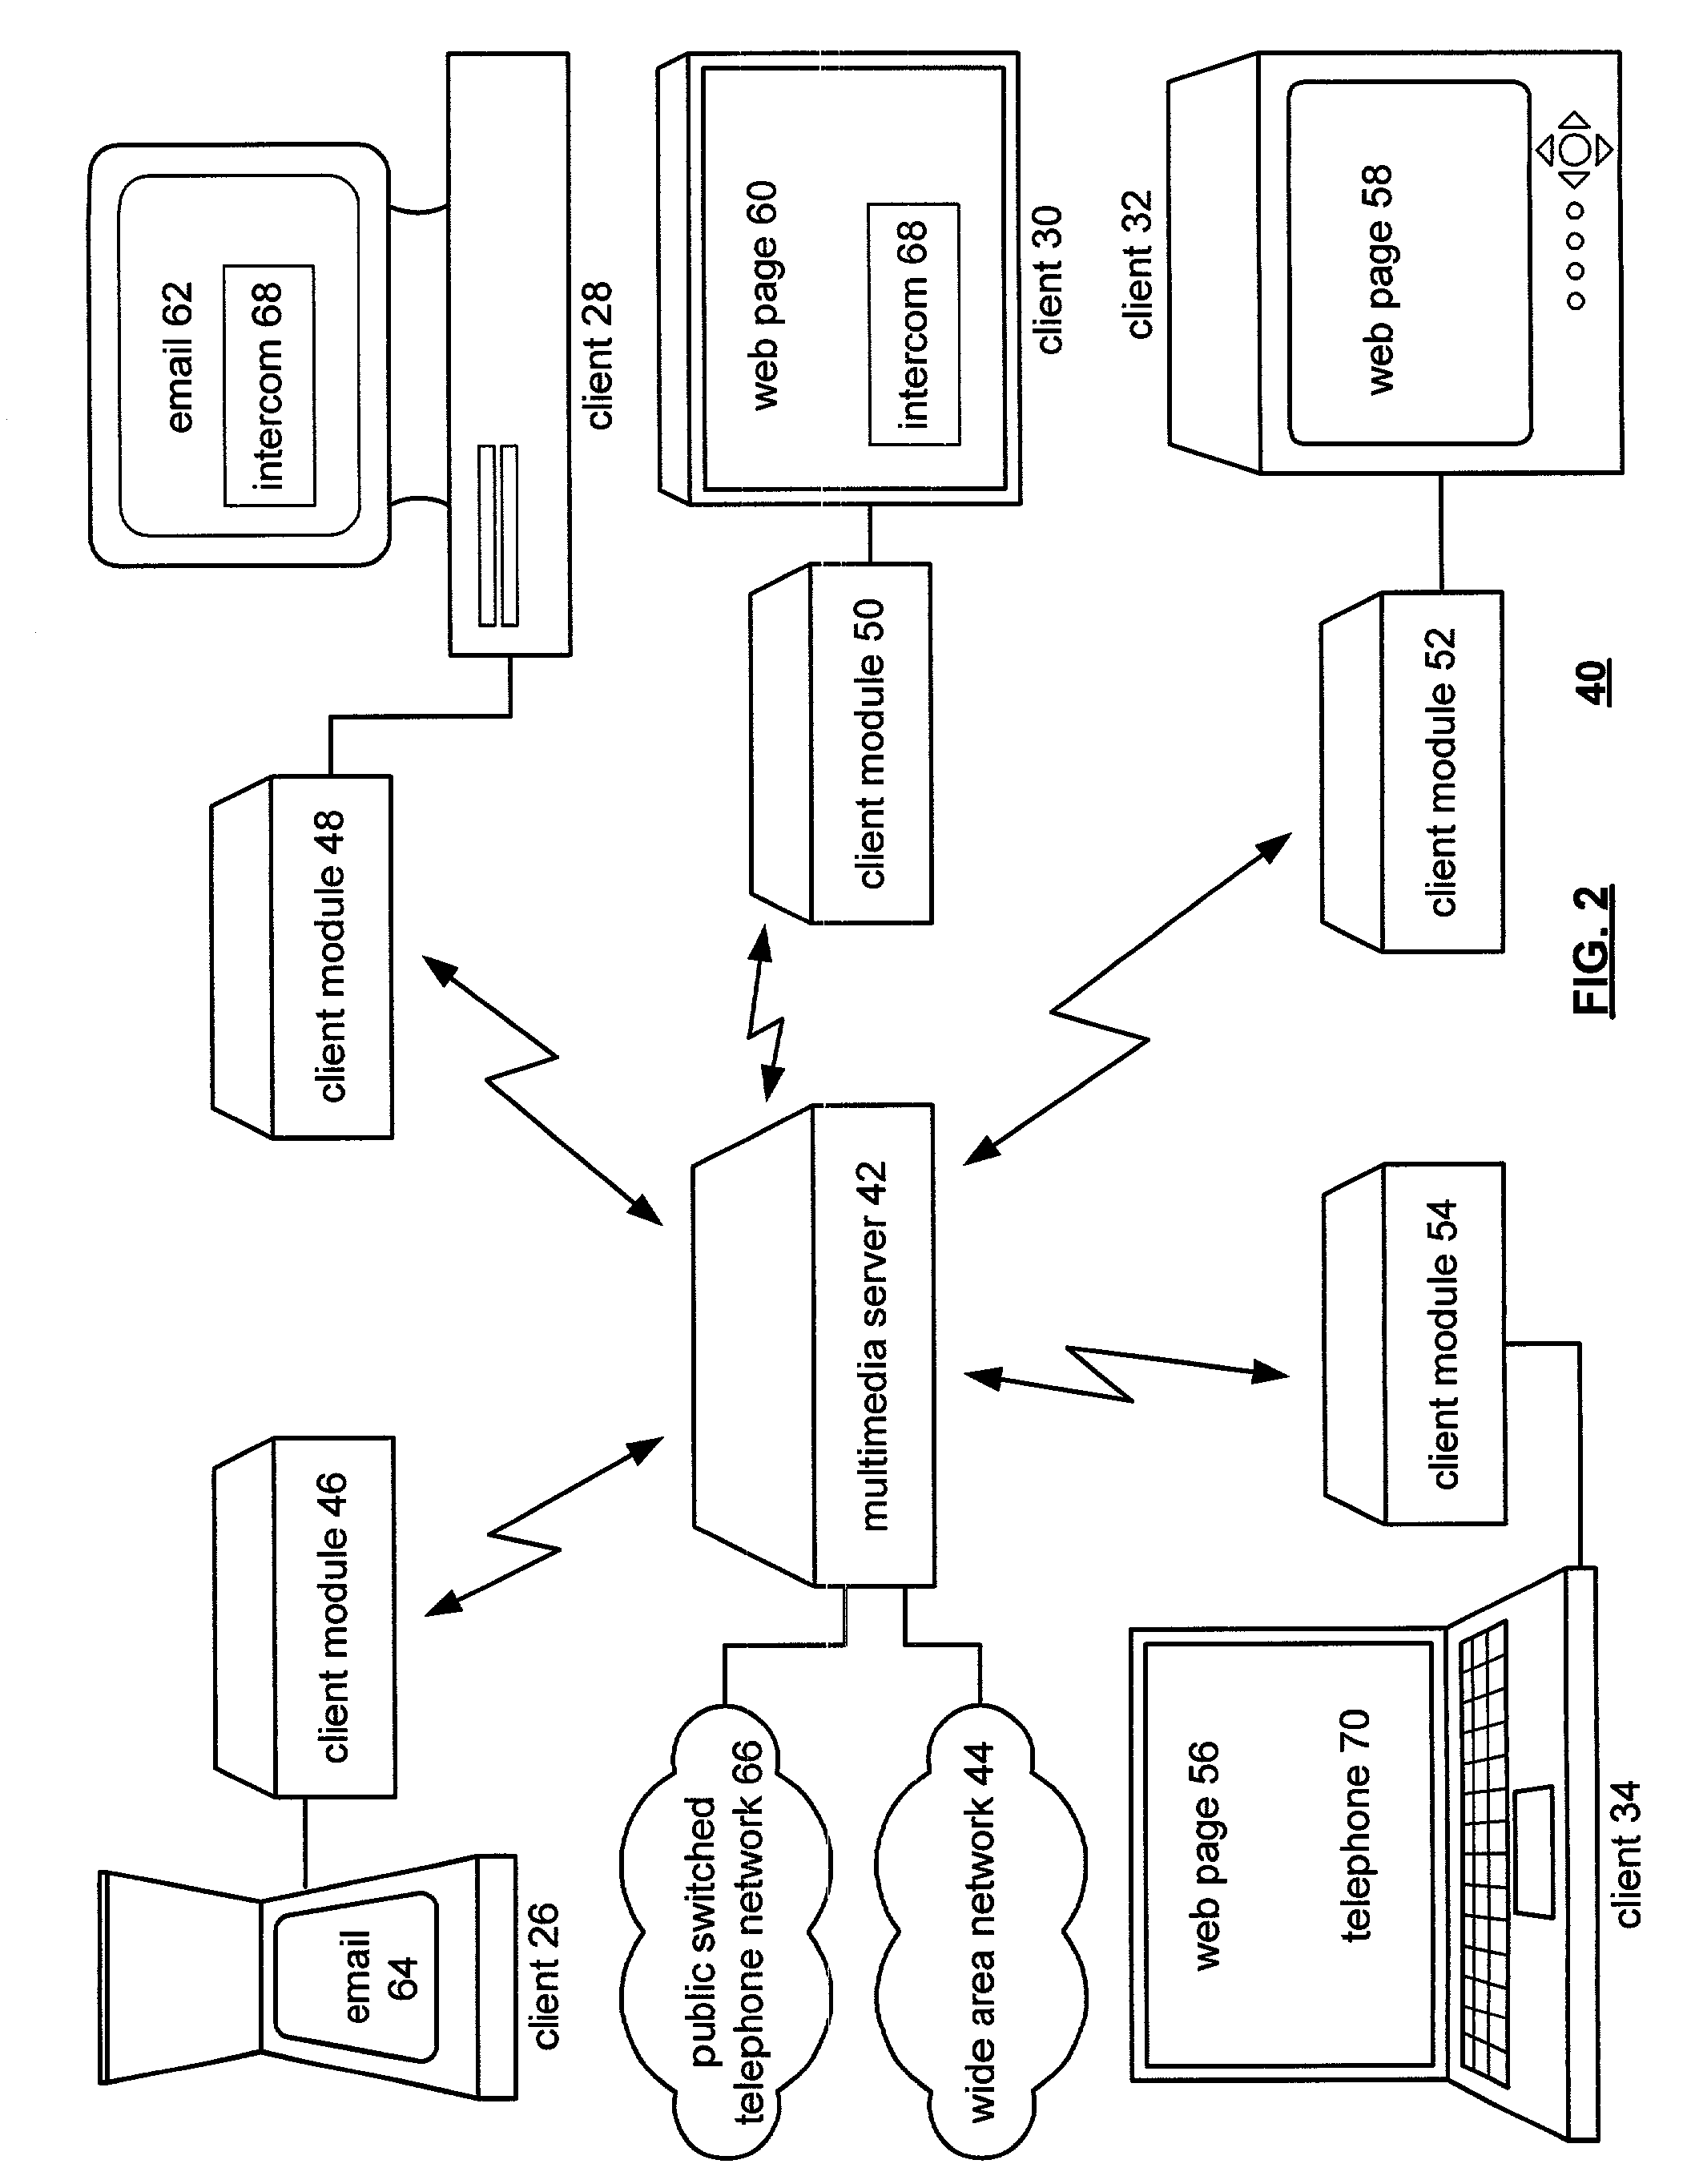 Method and apparatus of multiplexing a plurality of channels in a multimedia system